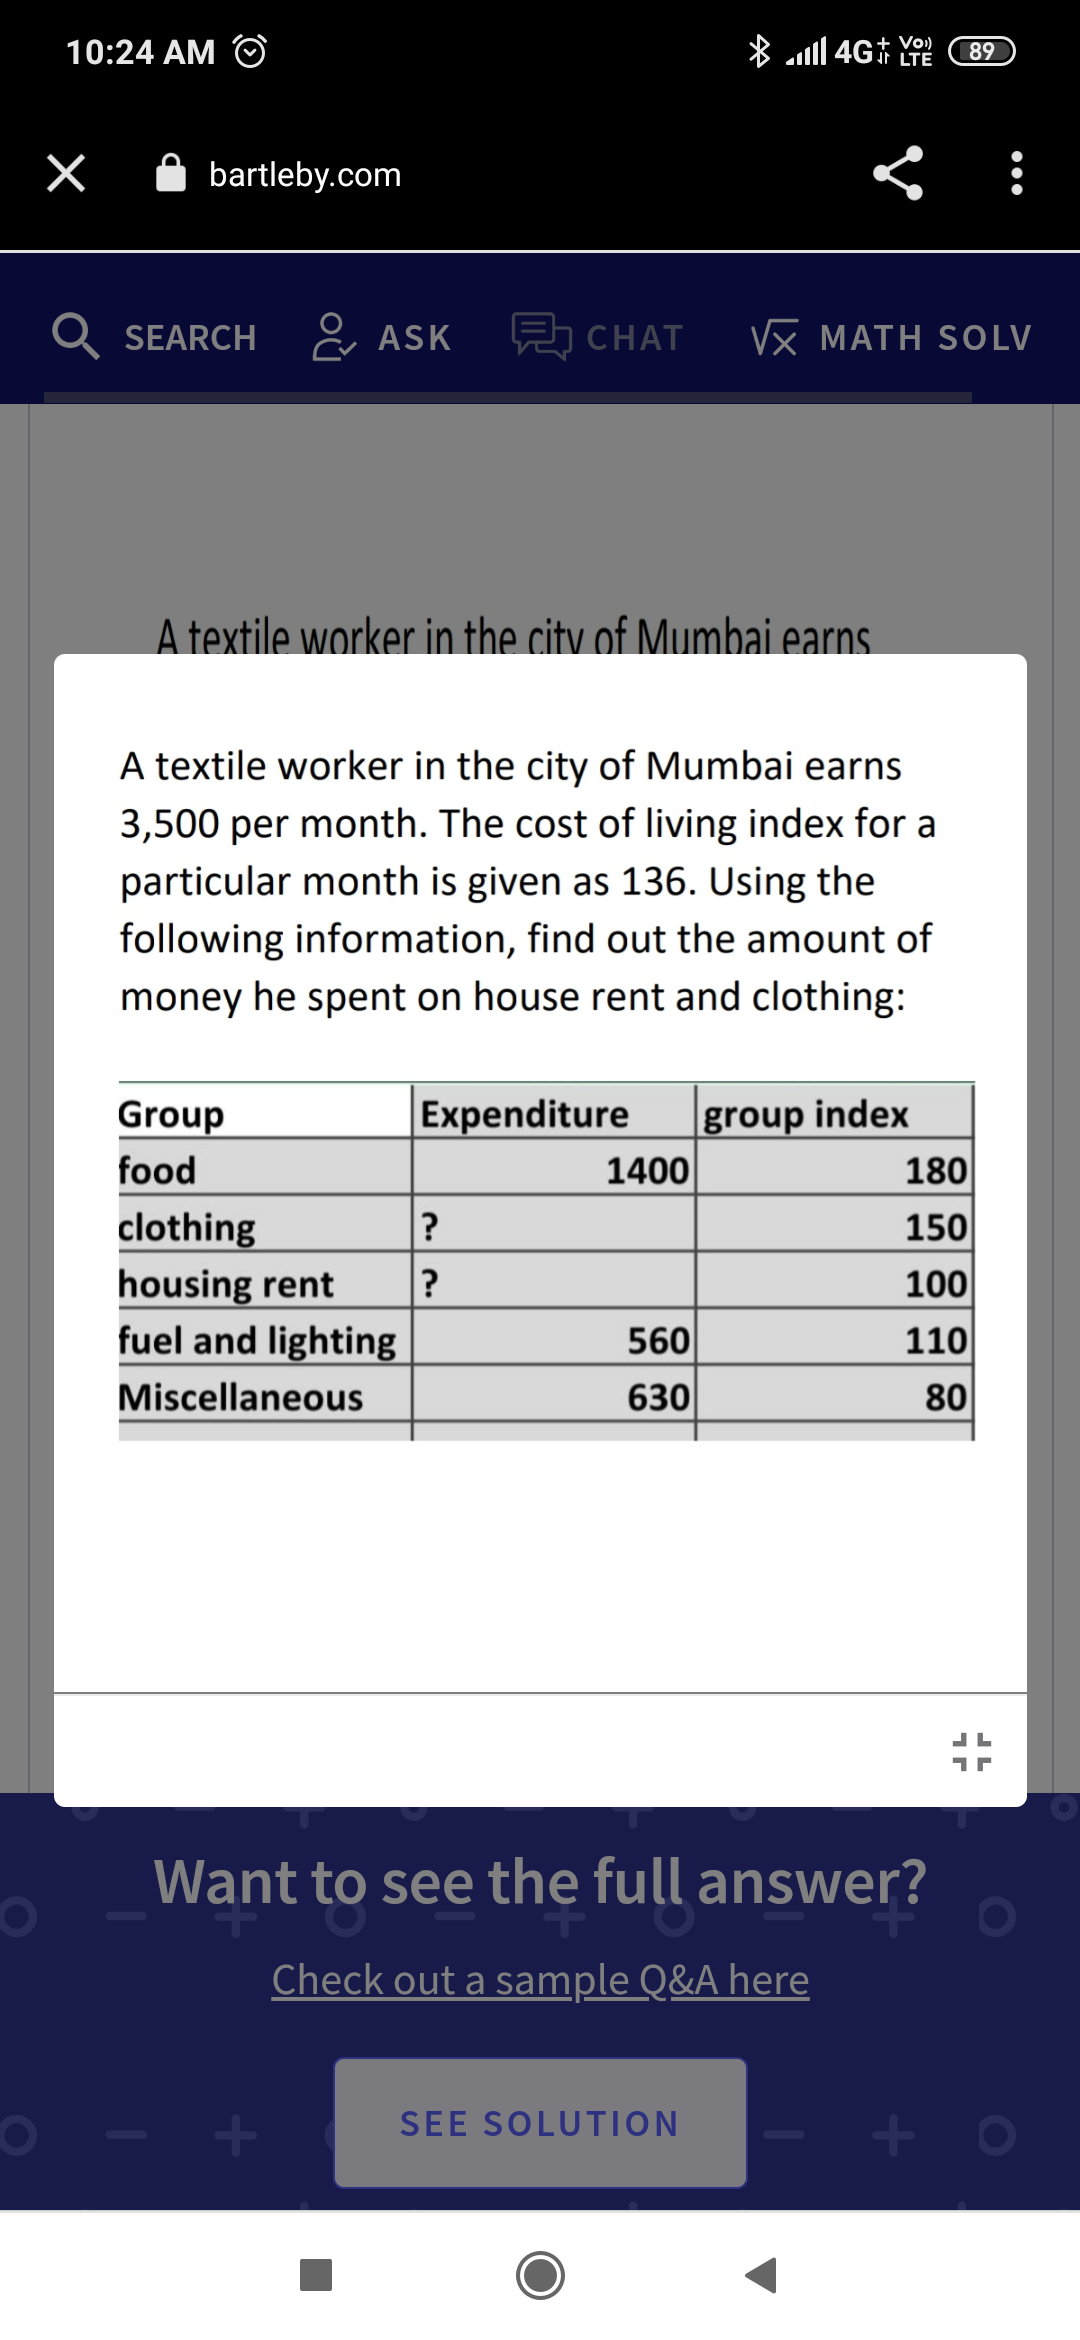 * ll 4G† LTE
+ Vo)
10:24 AM
89
A bartleby.com
SEARCH
ASK
5 CHAT
Vx MATH SOLV
A textile worker in the city of Mumbai earns.
A textile worker in the city of Mumbai earns
3,500 per month. The cost of living index for
particular month is given as 136. Using the
following information, find out the amount of
money he spent on house rent and clothing:
group index
1400
Group
Expenditure
food
180
150
clothing
housing rent
fuel and lighting
?
?
100
560
110
Miscellaneous
630
80
Want to see the full answer?
Check out a sample Q&A here
SEE SOLUTION
